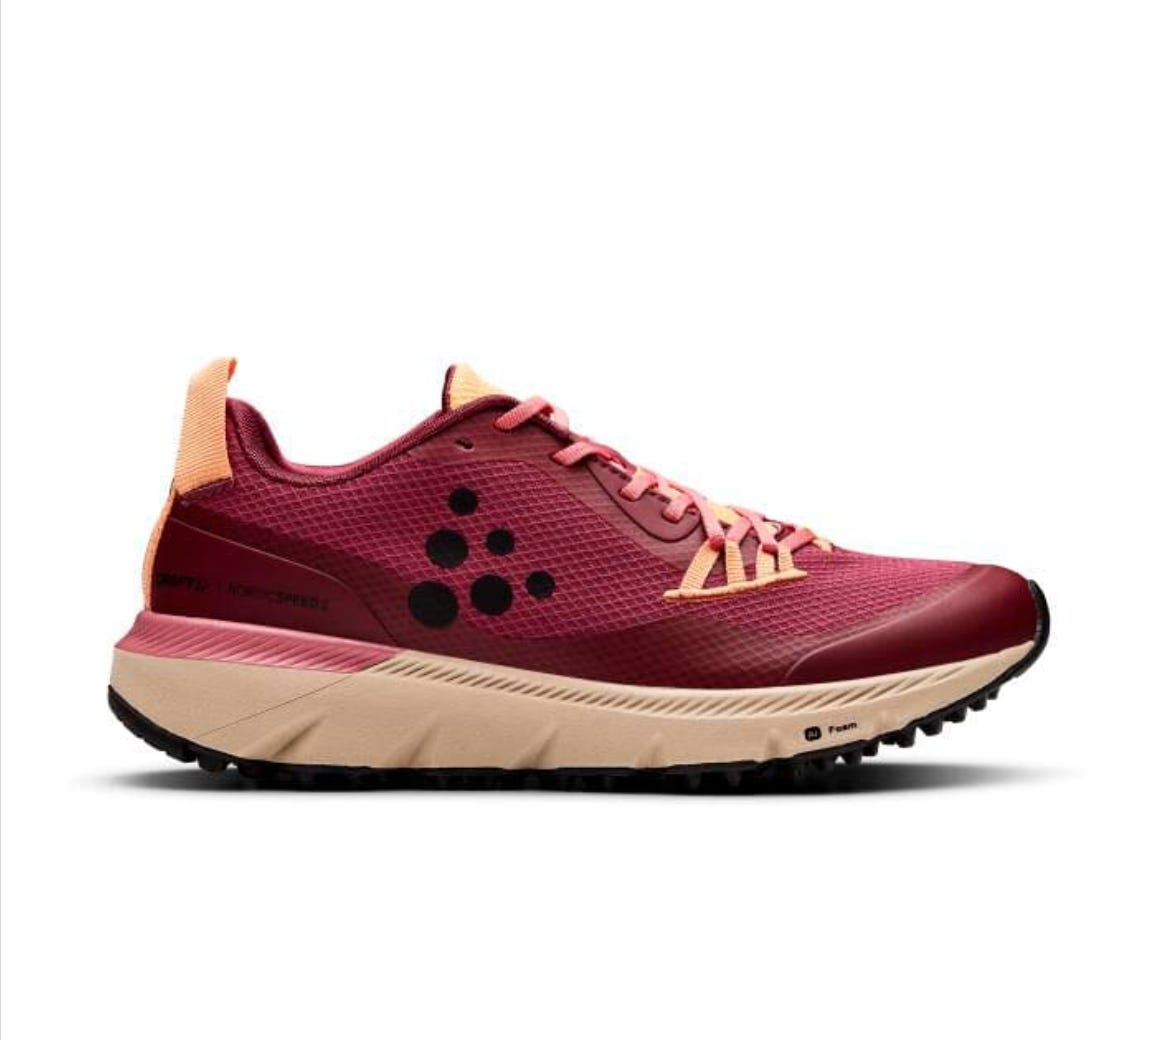 cranberry colored trail running shoes with tan base